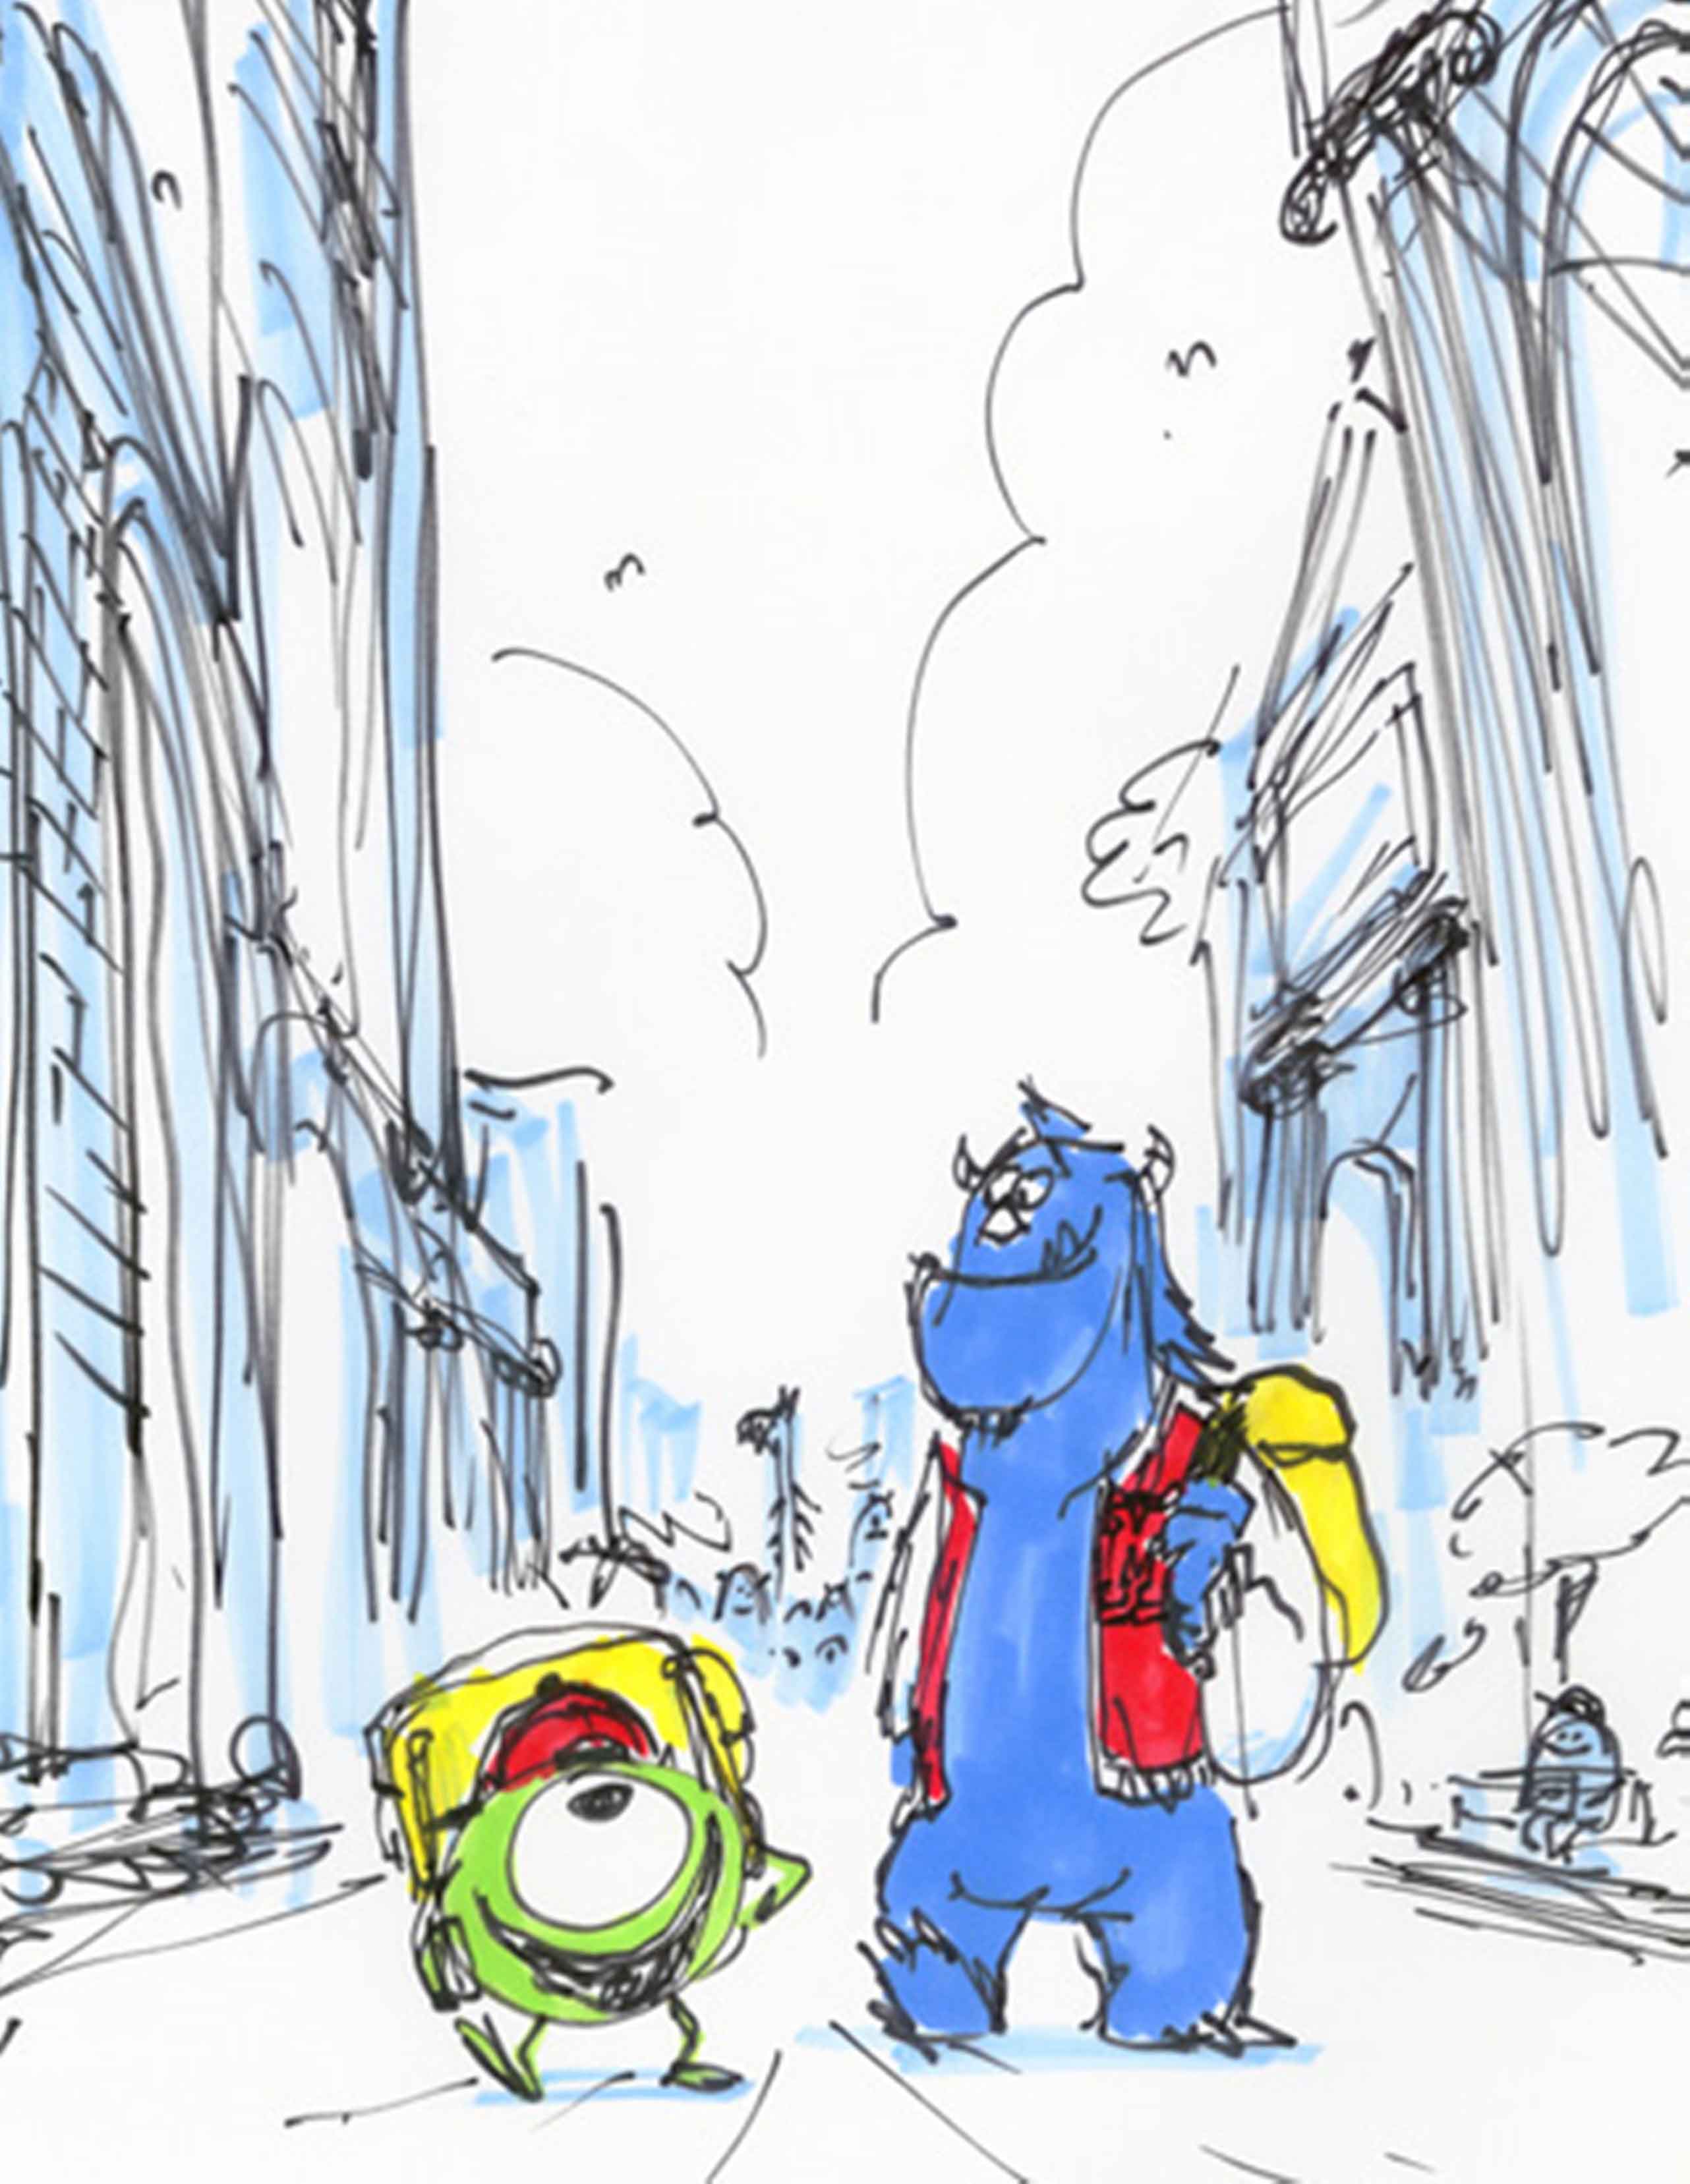 Ricky Nierva, , Monsters University, Reproduction of ink and marker on paper, 2013.출처:동대문 디자인 플라자(DDP) 홈페이지(http://www.ddp.or.kr)